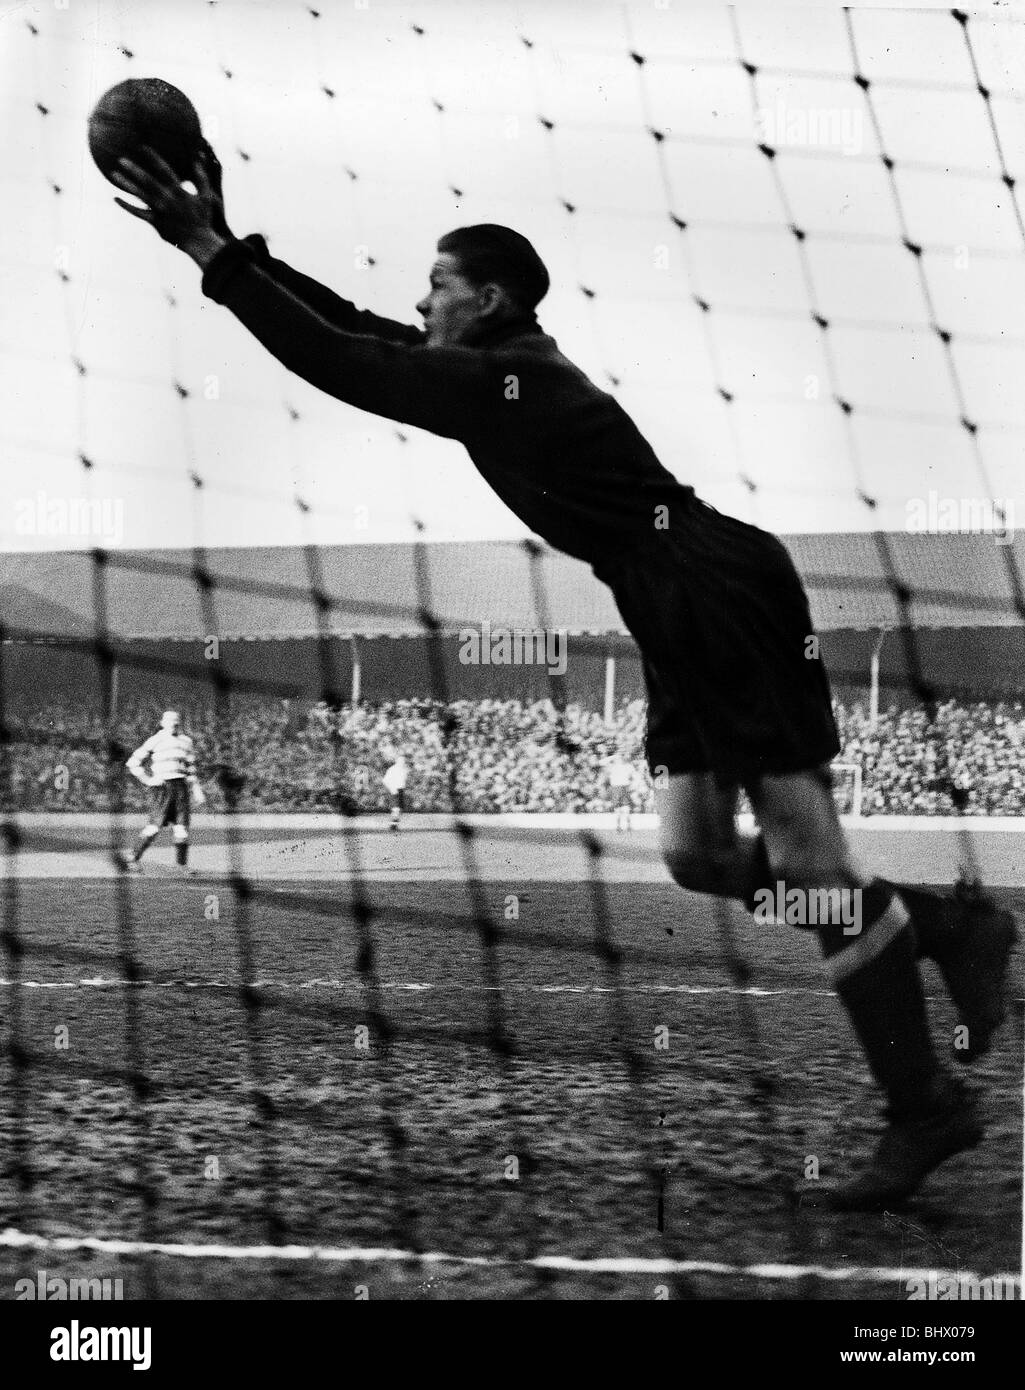 Ted Ditchman the Spurs goalkeeper chosen to play for England. Stock Photo